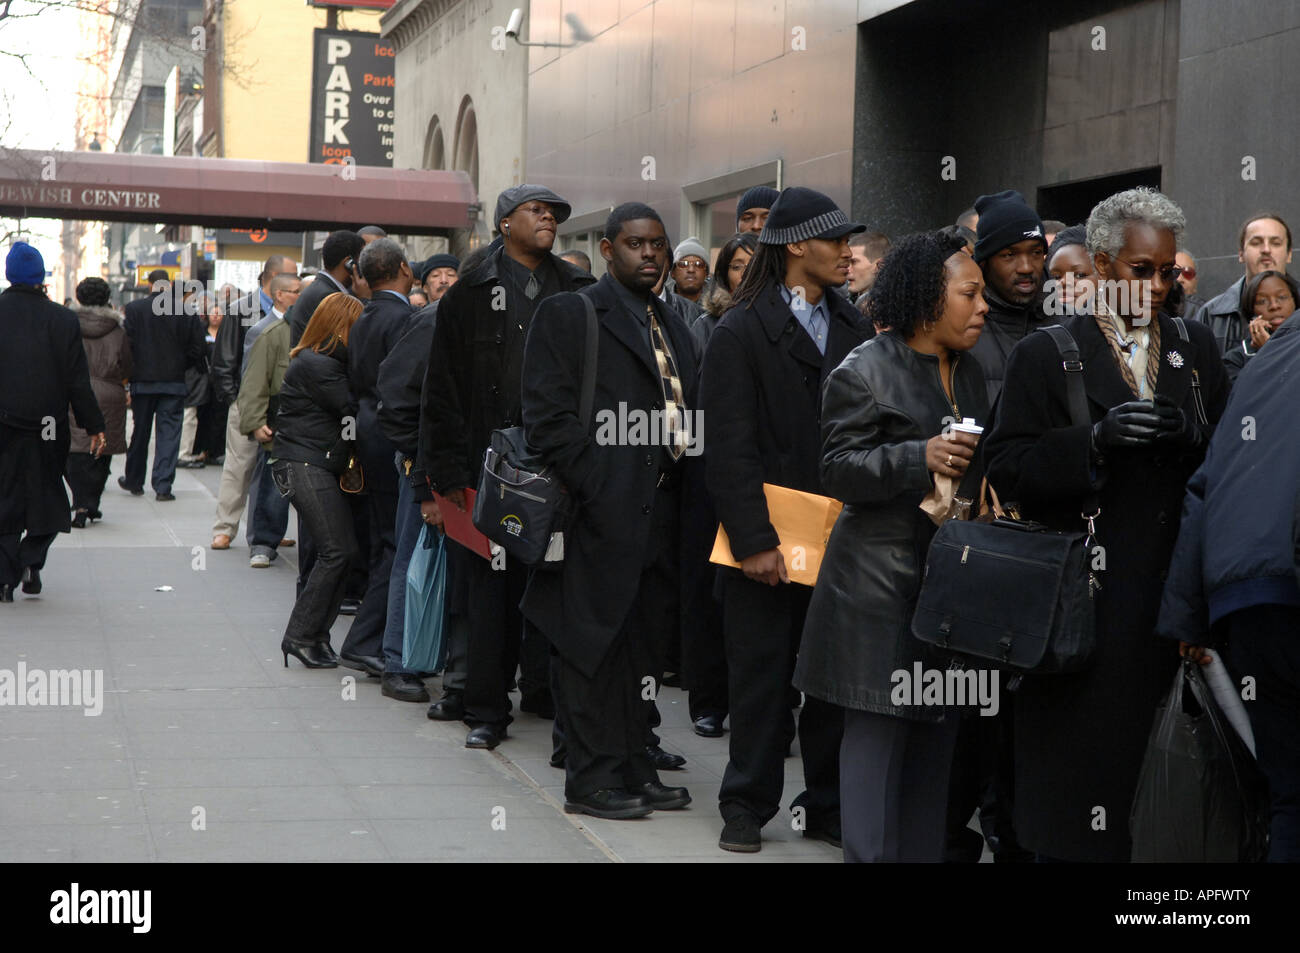 Hundred queue up at a Job Fair at The New Yorker Hotel in NYC Stock Photo